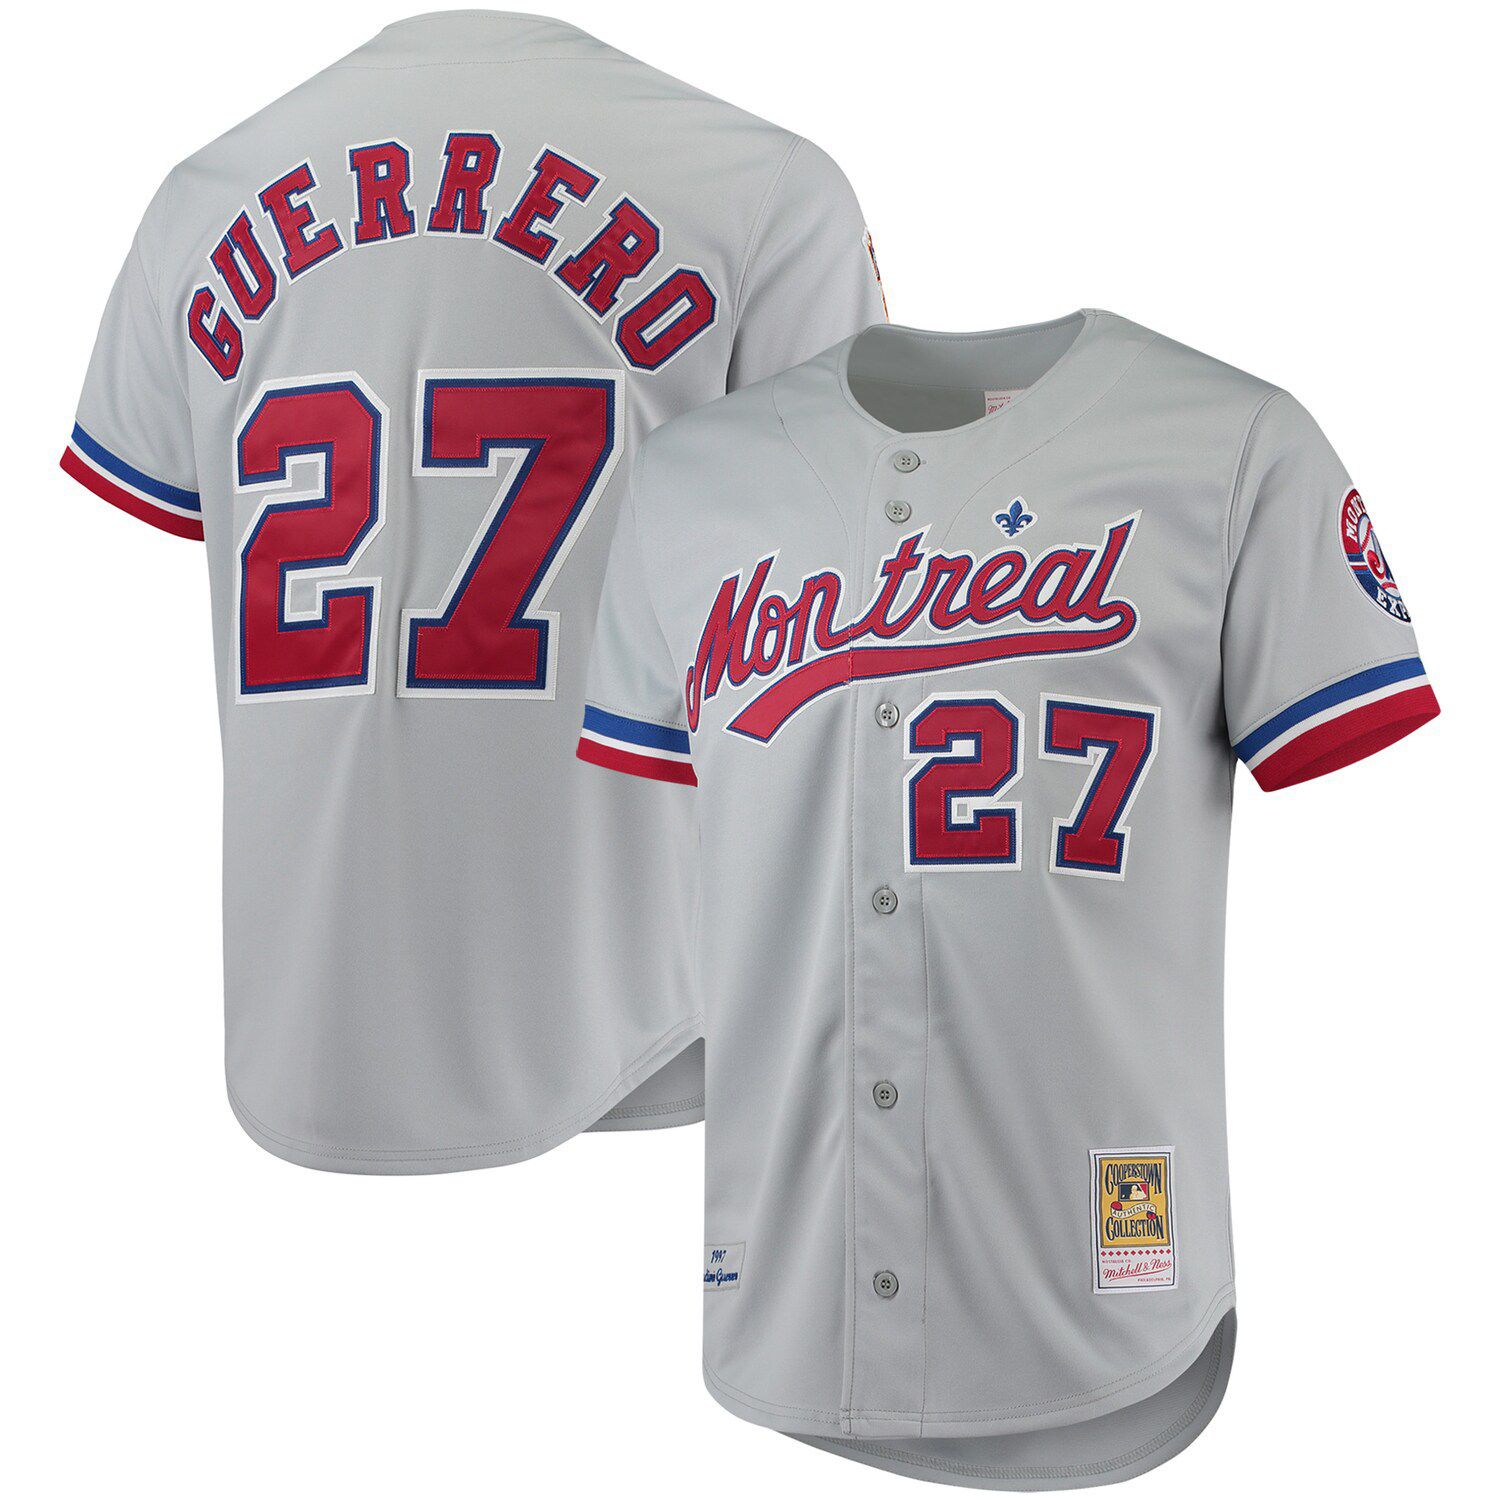 Cooperstown Collection Montreal Expos TIM RAINES Throwback Baseball Jersey  GRAY